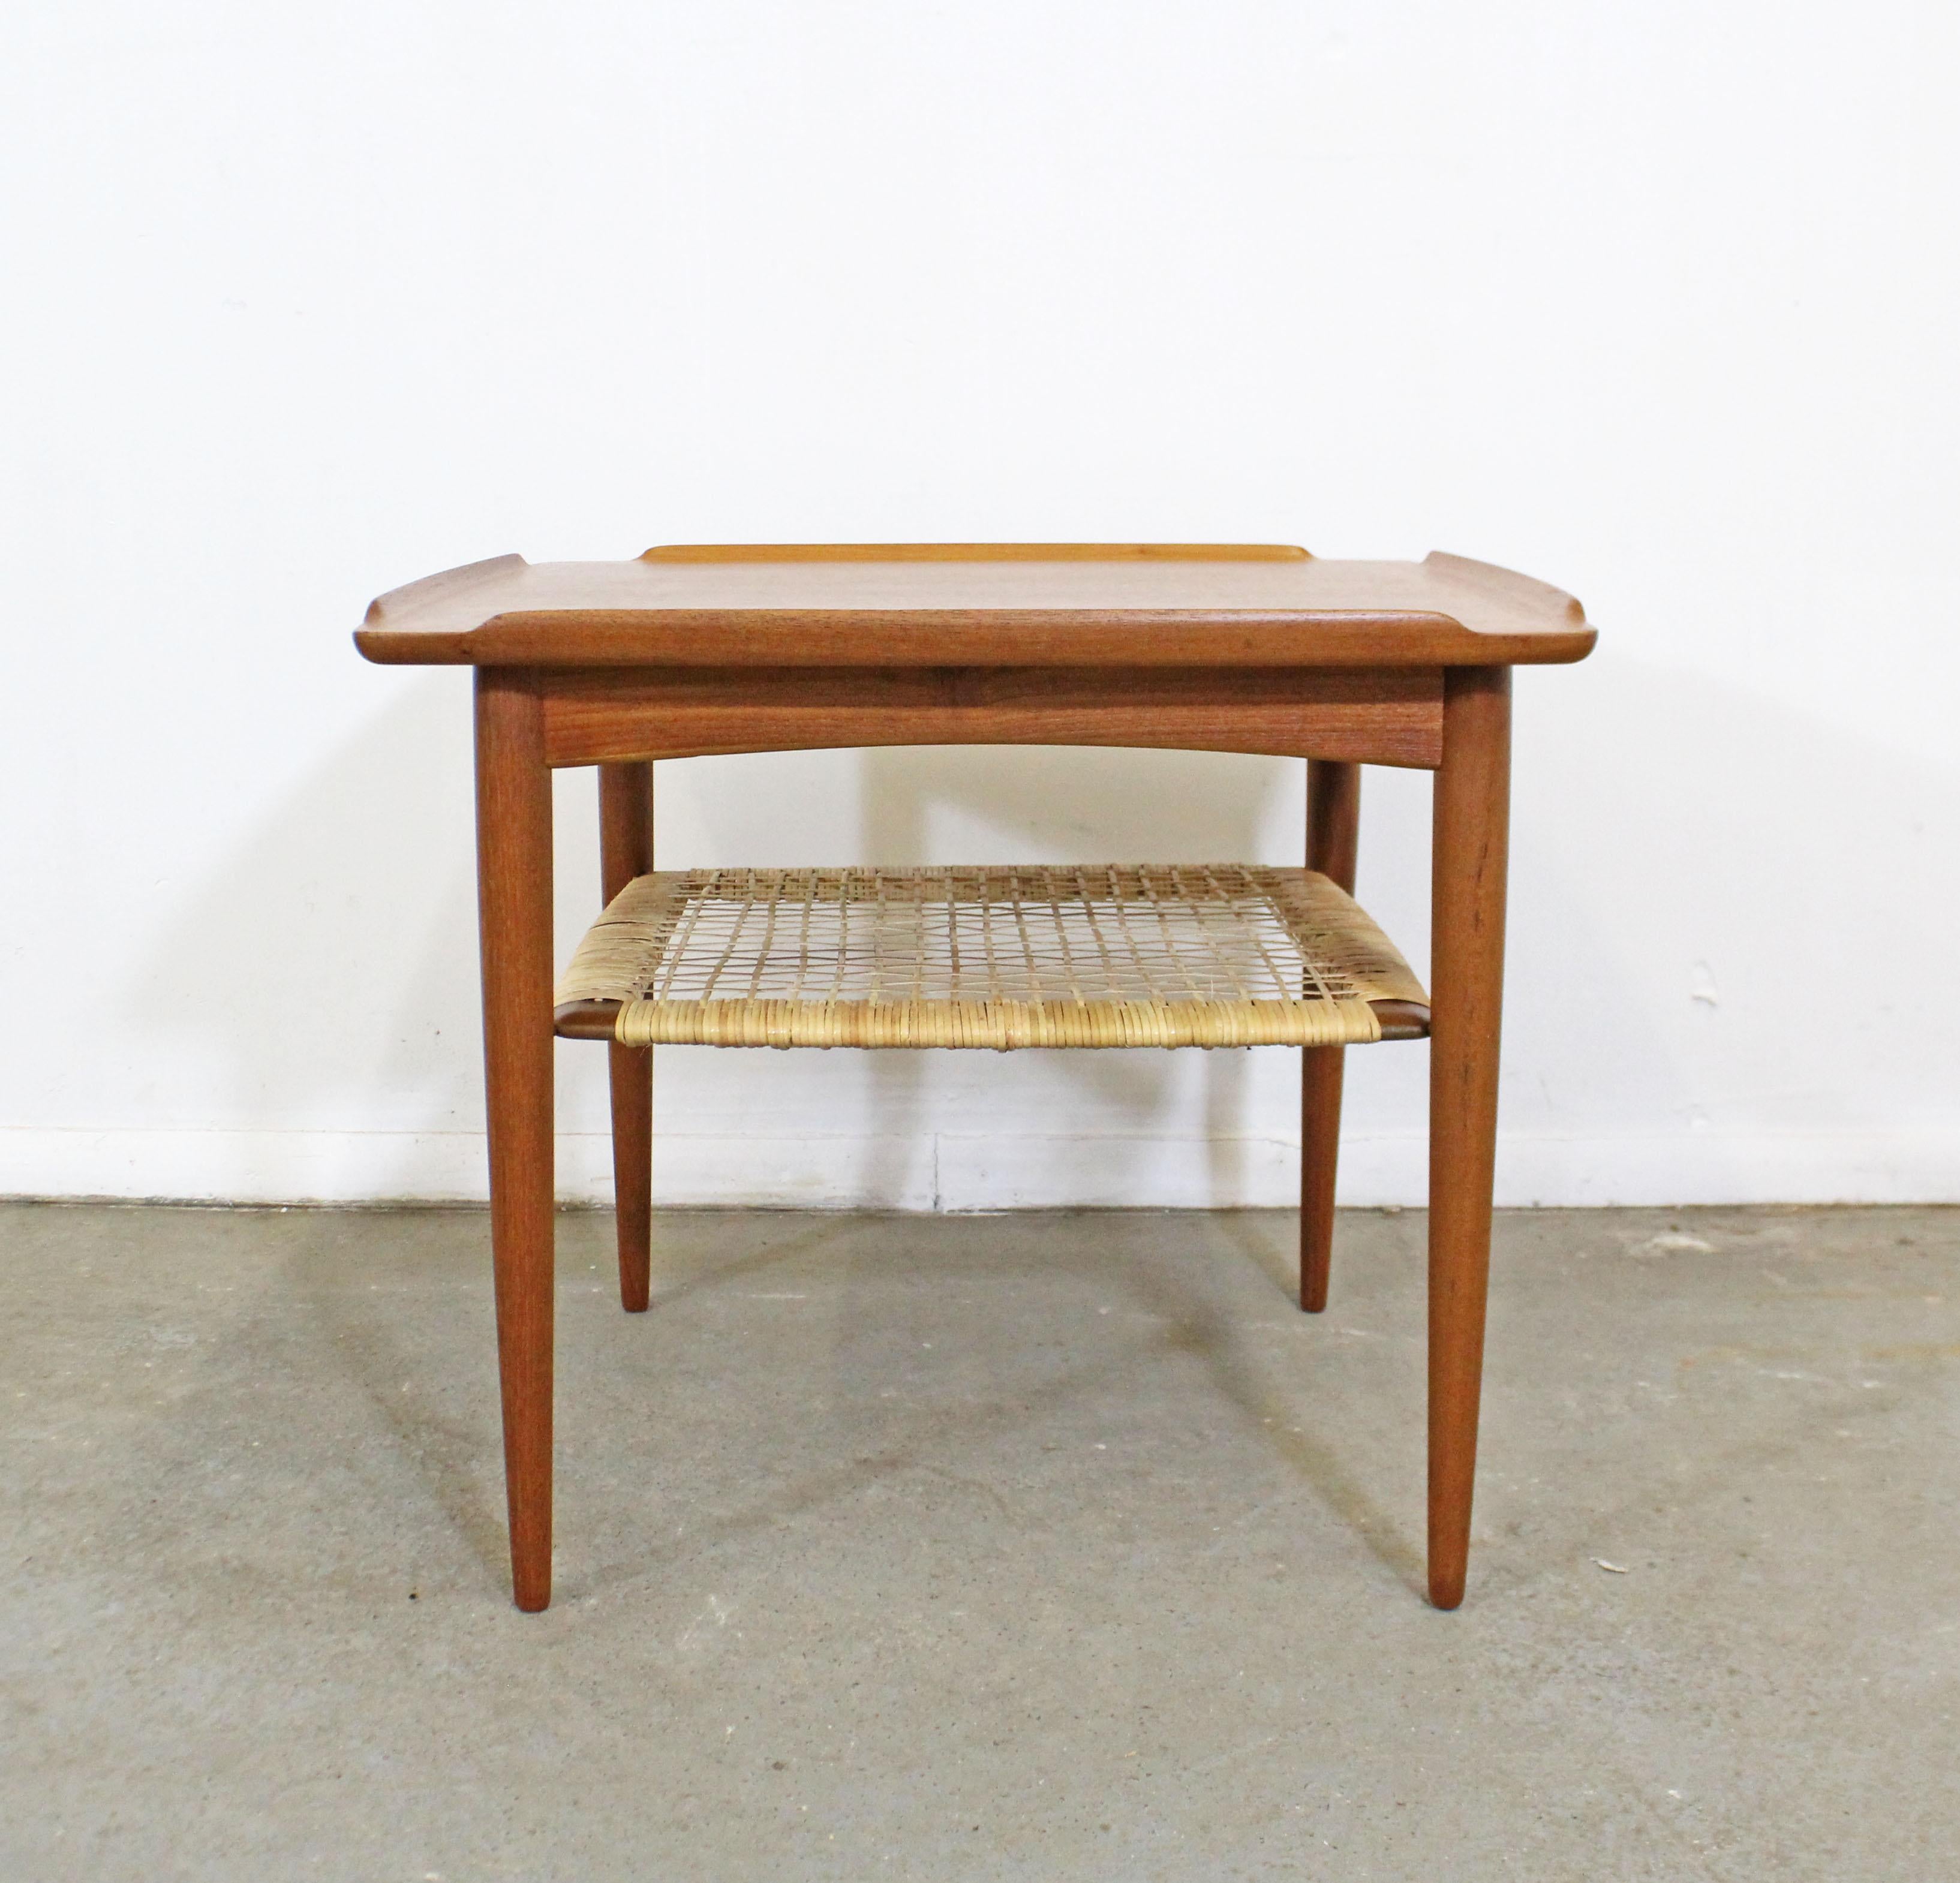 What a find! Offered is a Danish modern square table designed by Poul Jensen for Selig. The table is made of teak with a caned shelf that has been professionally restored. It is in excellent condition with little to no wear. It is not signed.